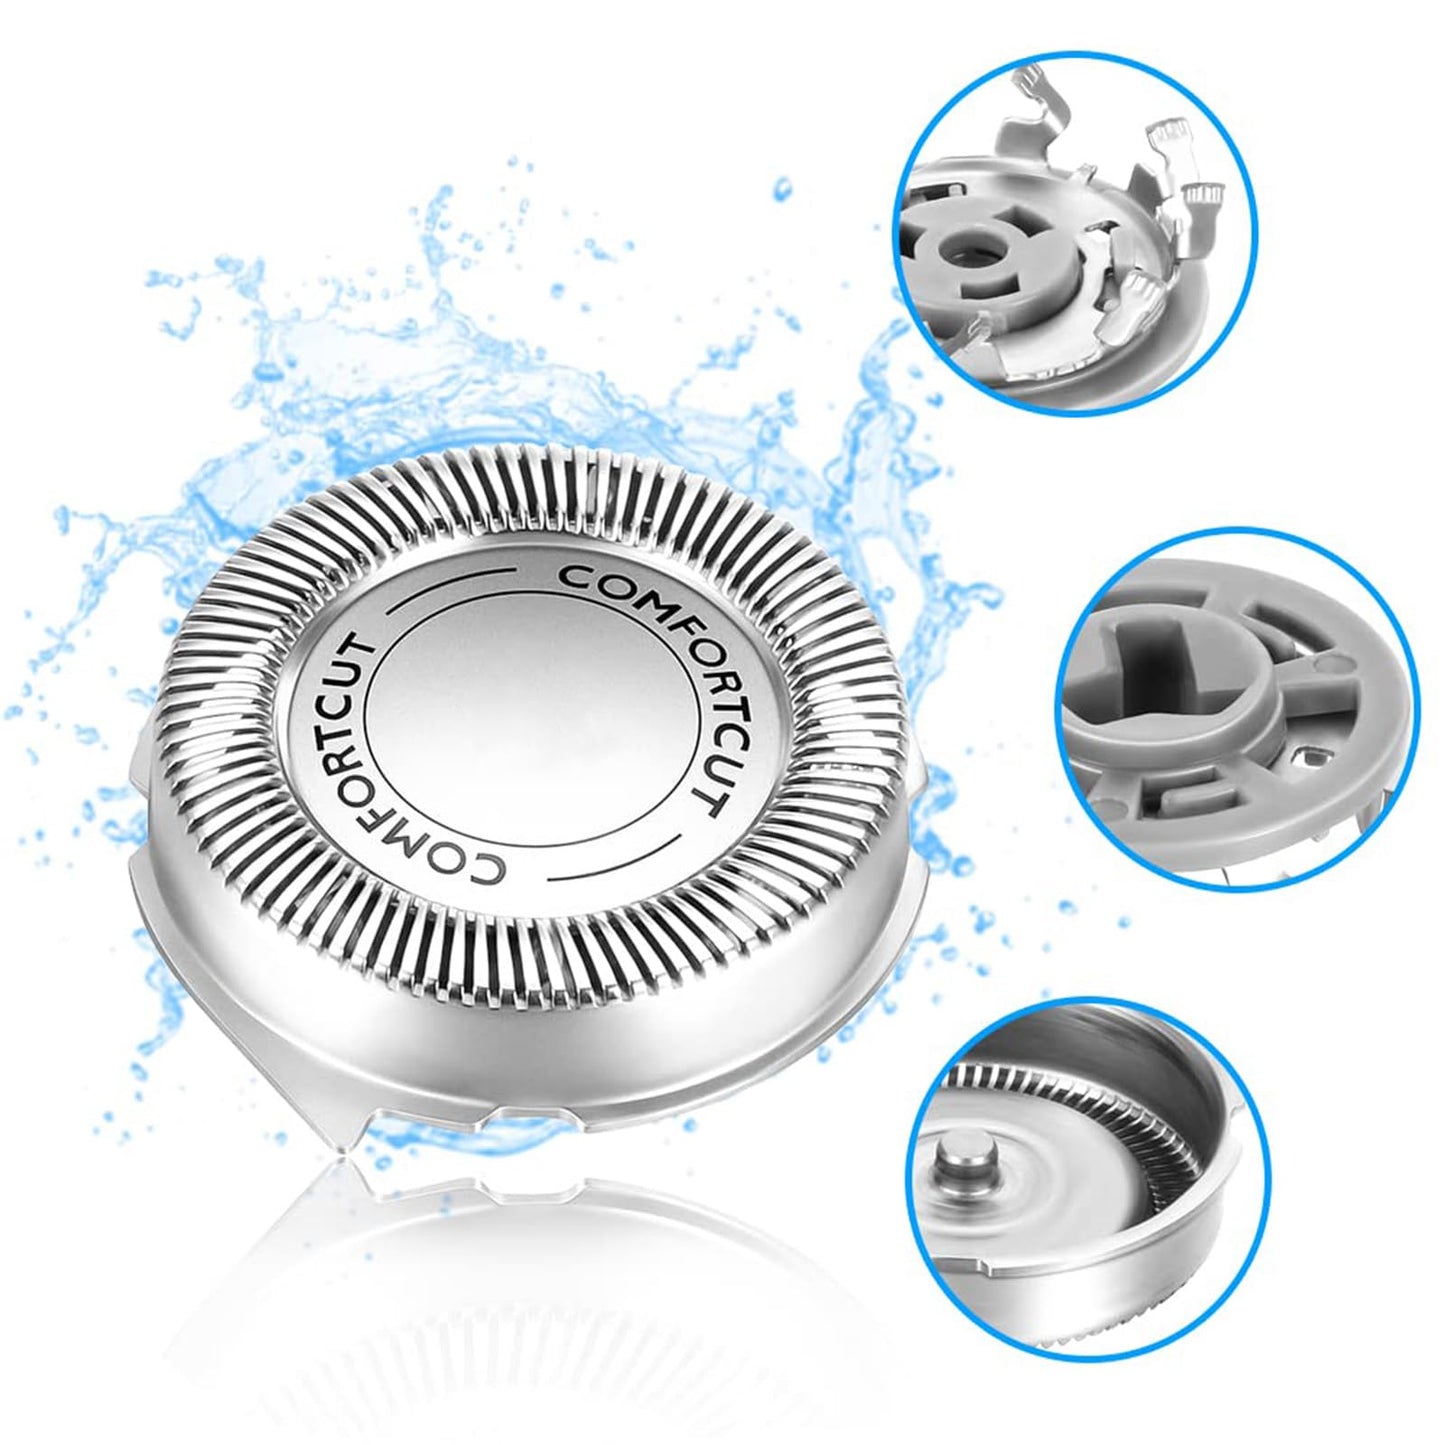 SH30 Replacement Heads for Philips Norelco Series 3000, 2000, 1000 Shavers and S738 Click and Style Fits The Following Models: S1150, S1015, S1100, S1560 Replacement Blades